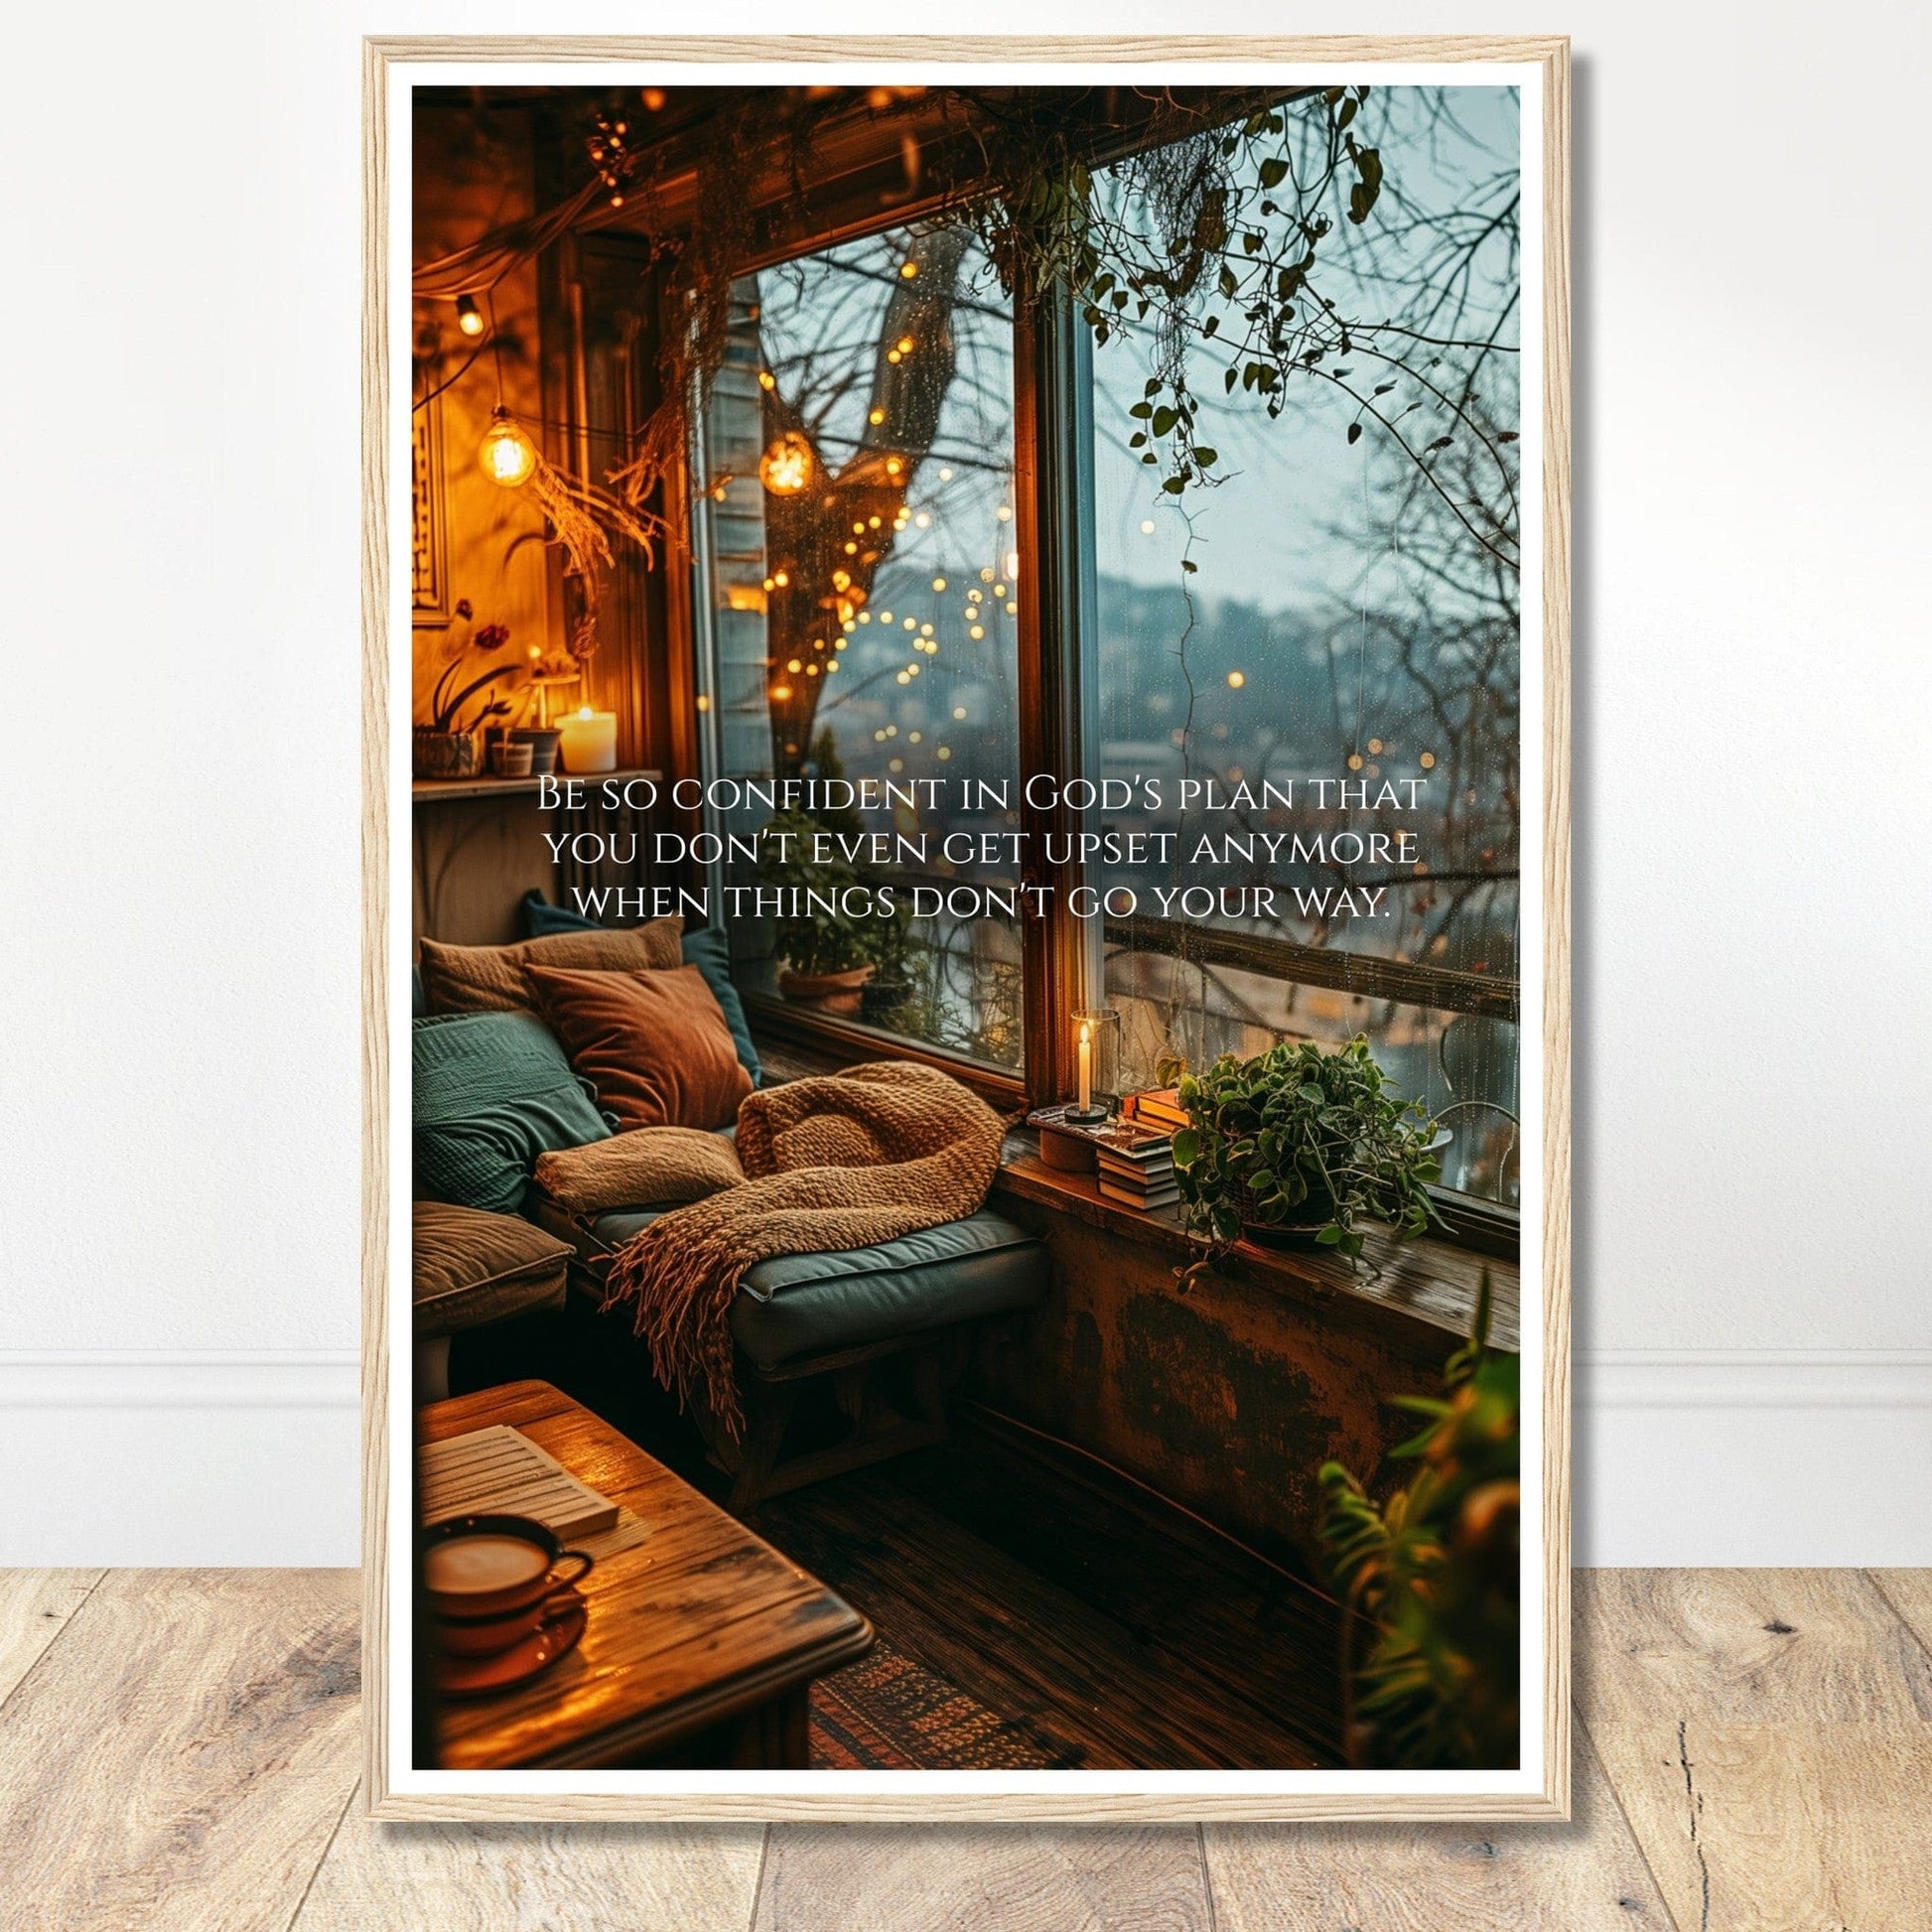 Coffee With My Father Print Material 60x90 cm / 24x36″ / Premium Matte Paper with Frame / Wood frame Be Confident In God's Plan - Customizable Christian Artwork